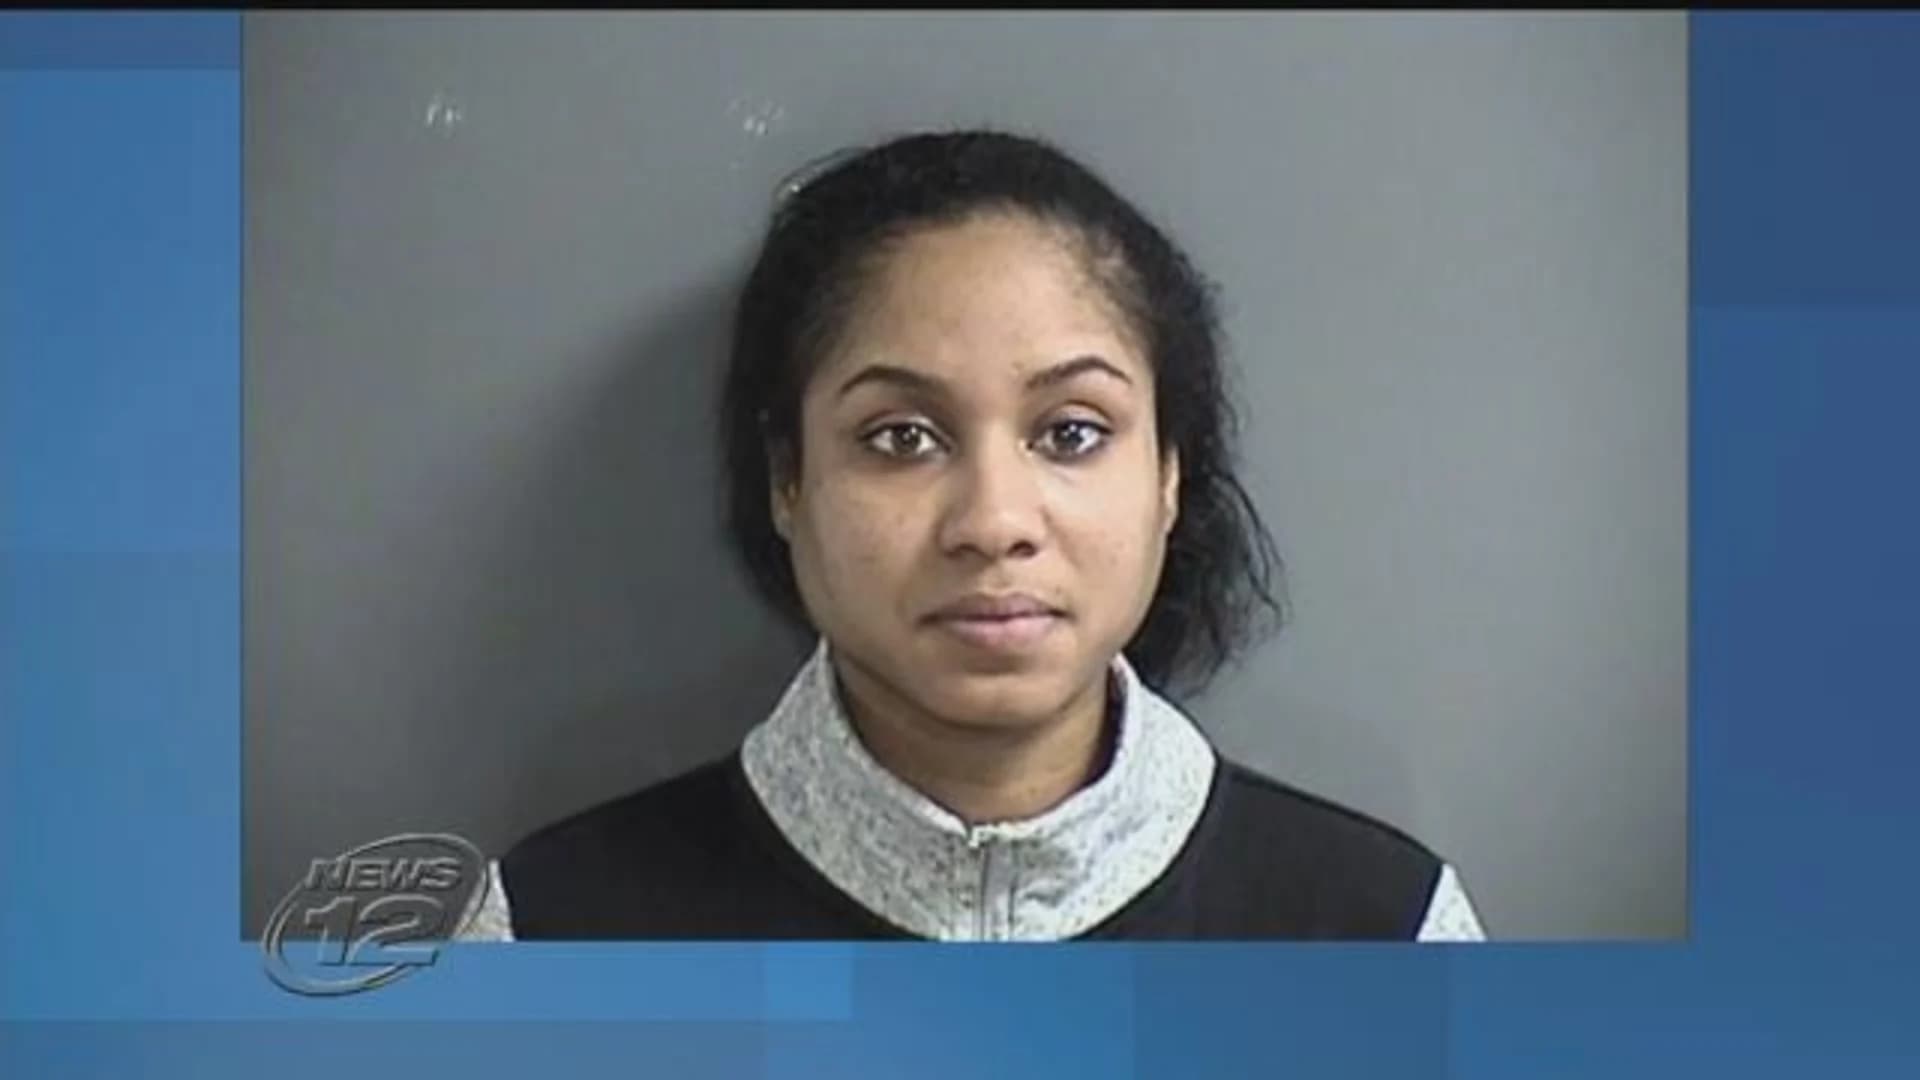 24-year-old mother faces charges in death of toddler son